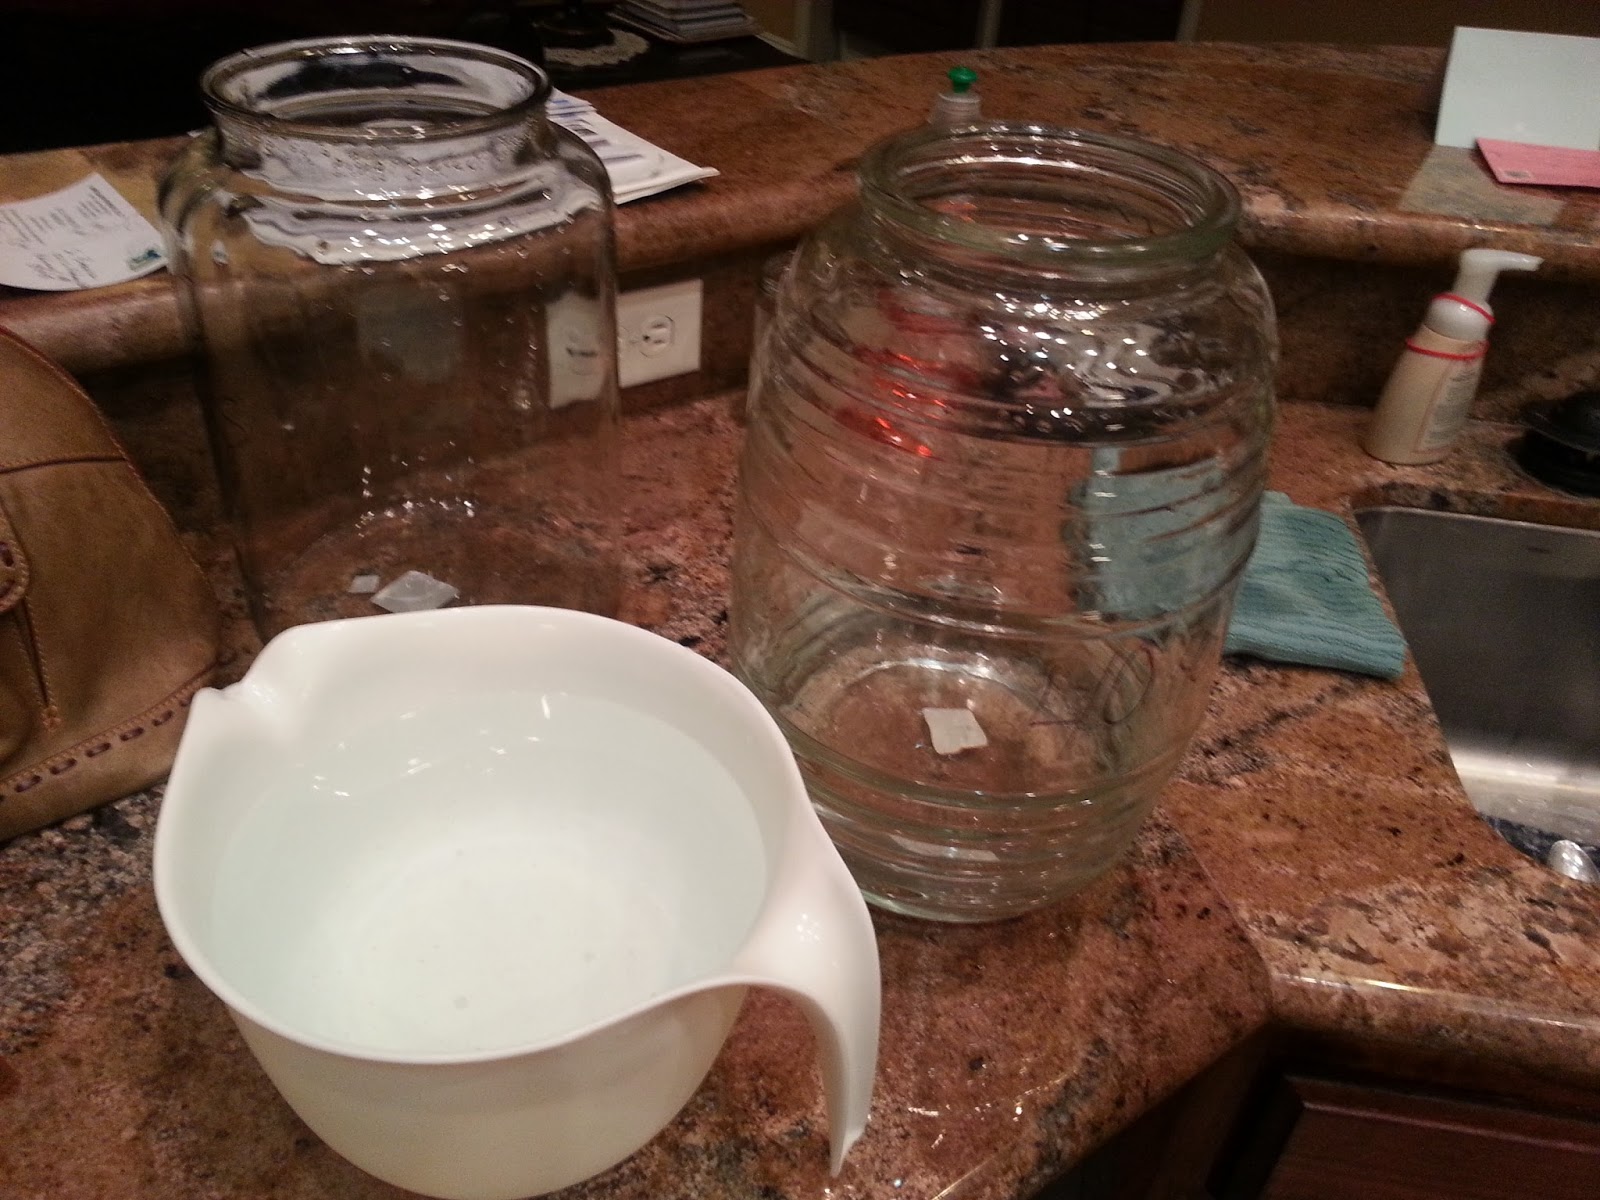  Step #2 of making monster-sized batches of colloidal silver; learn more at www.TheSilverEdge.com...